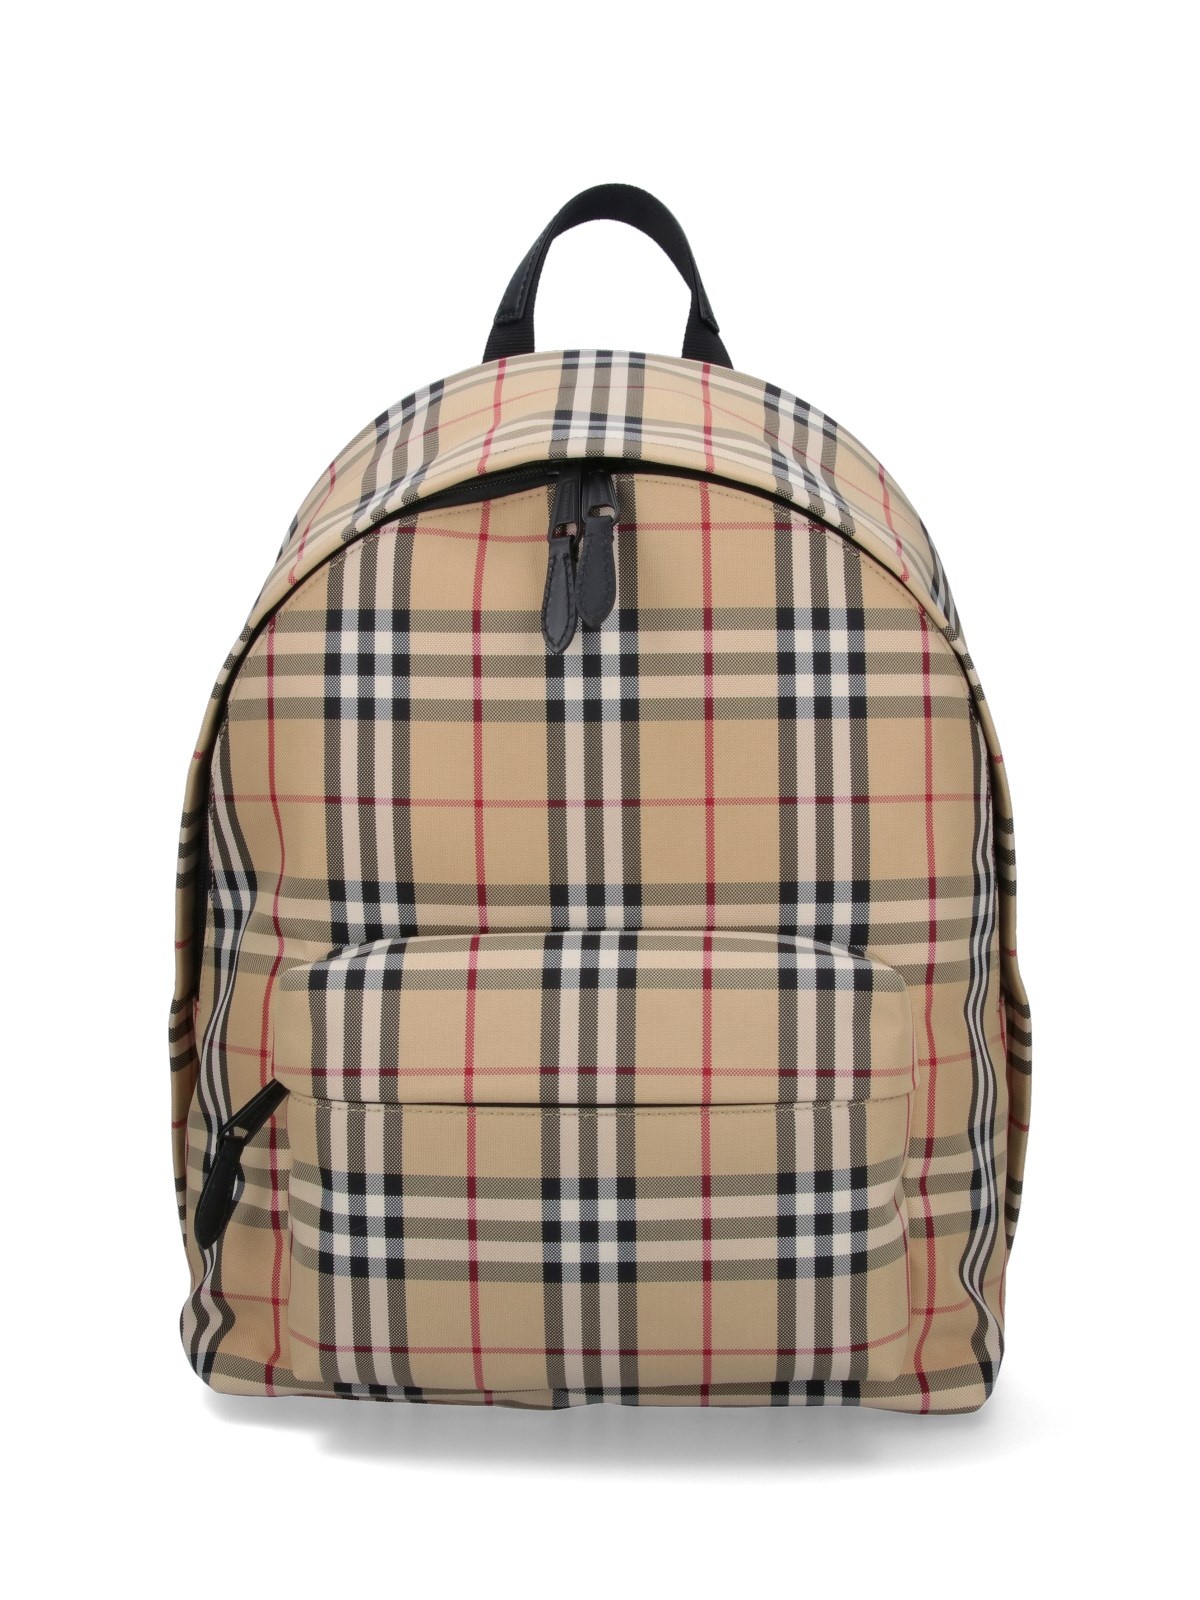 'CHECK' BACKPACK - 1